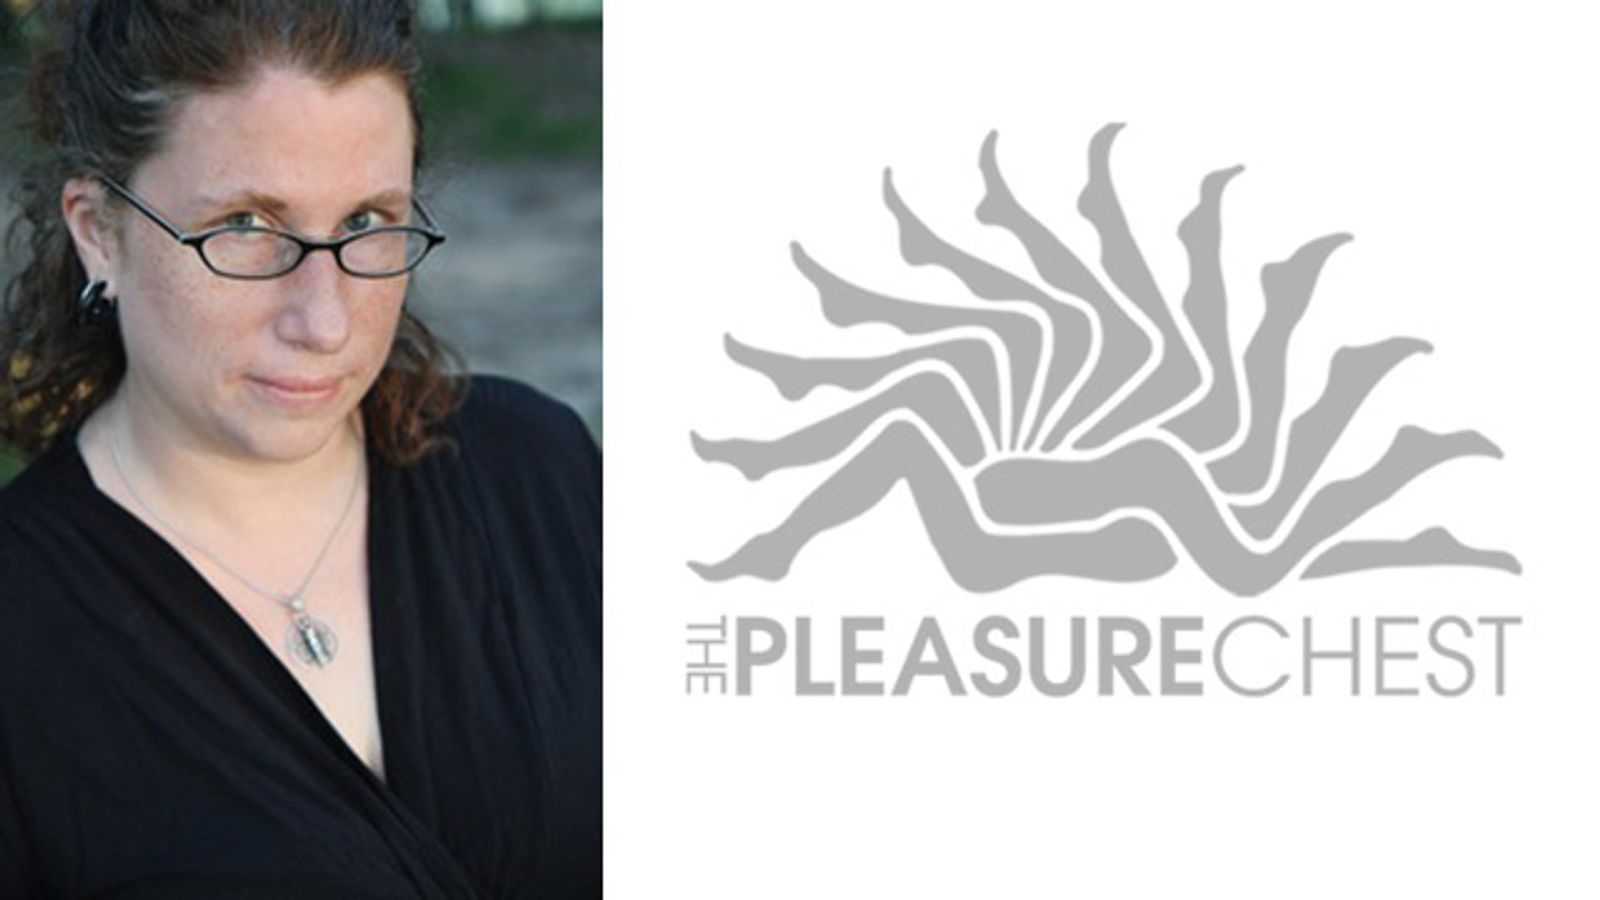 Sex Educator Sarah Sloane Hired by Pleasure Chest